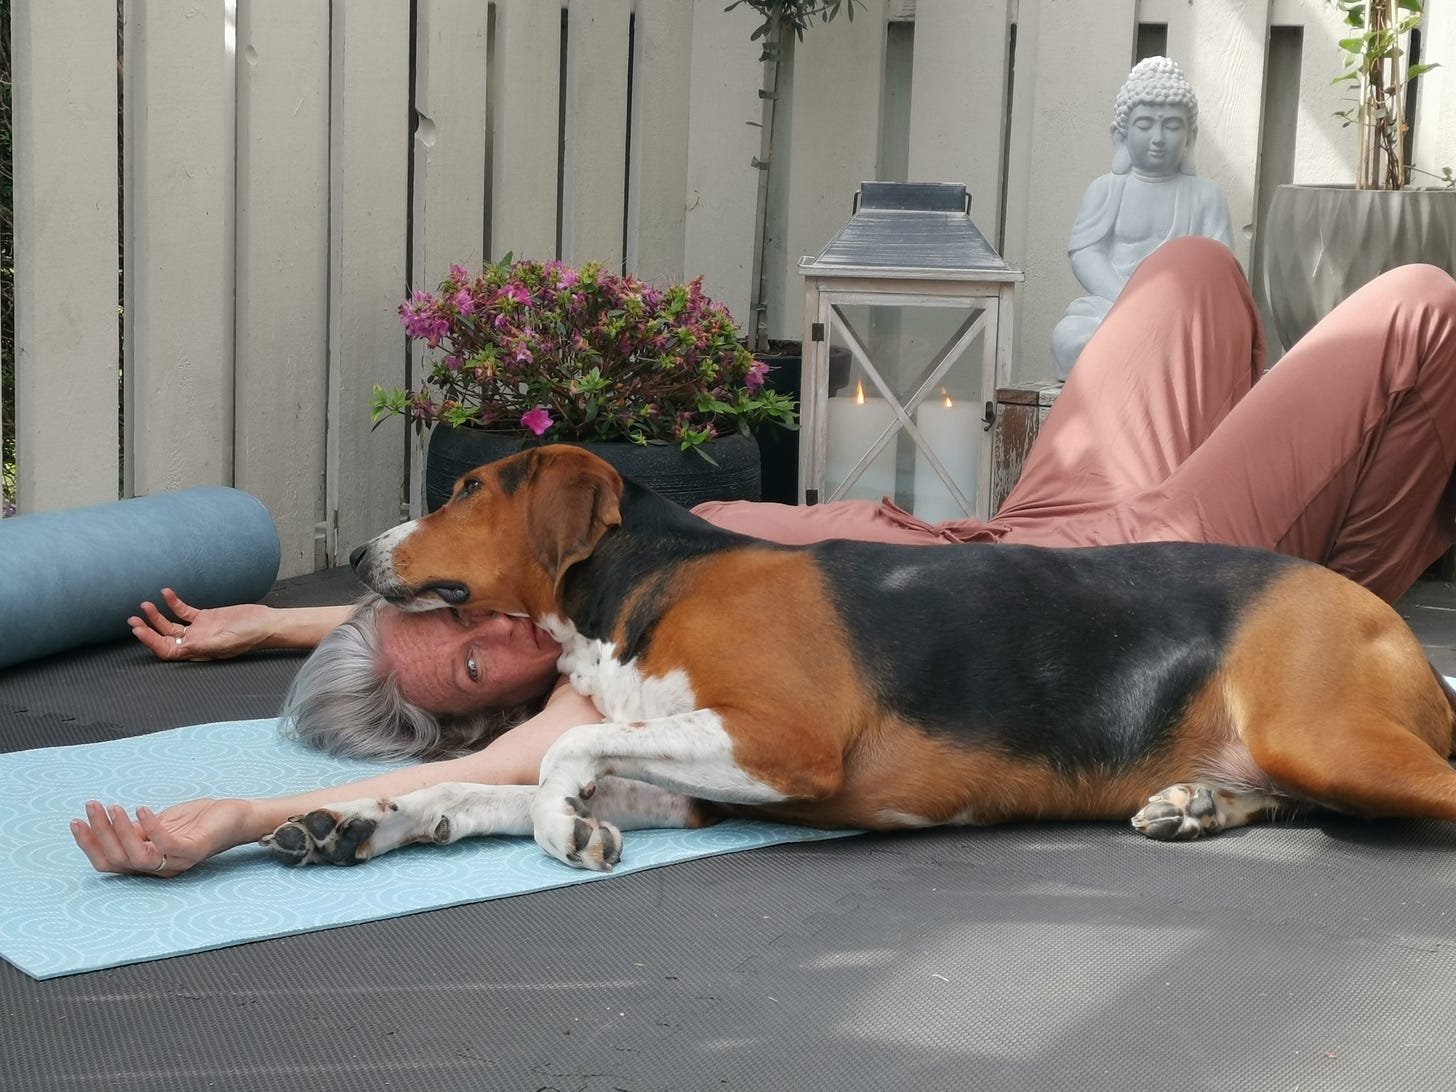 Ren is lying on a blue yoga mat, with flowering plants, candles and a buddha statue behind her. A large fox hound is lying beside her and up over her chest, resting his head on hers, effectively pinning her to the mat.